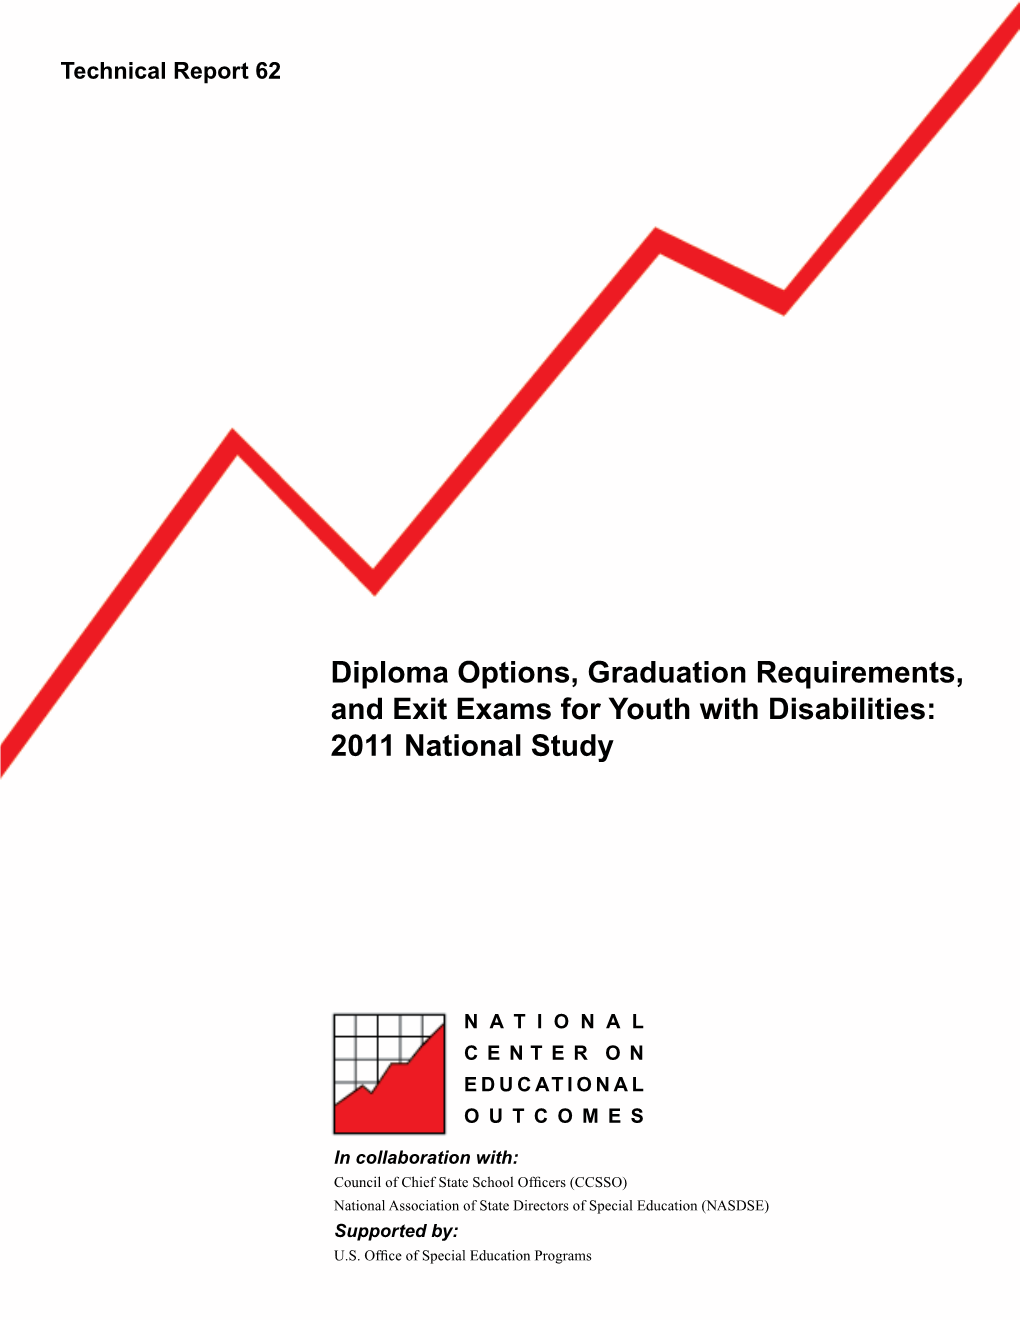 Diploma Options, Graduation Requirements, and Exit Exams for Youth with Disabilities: 2011 National Study